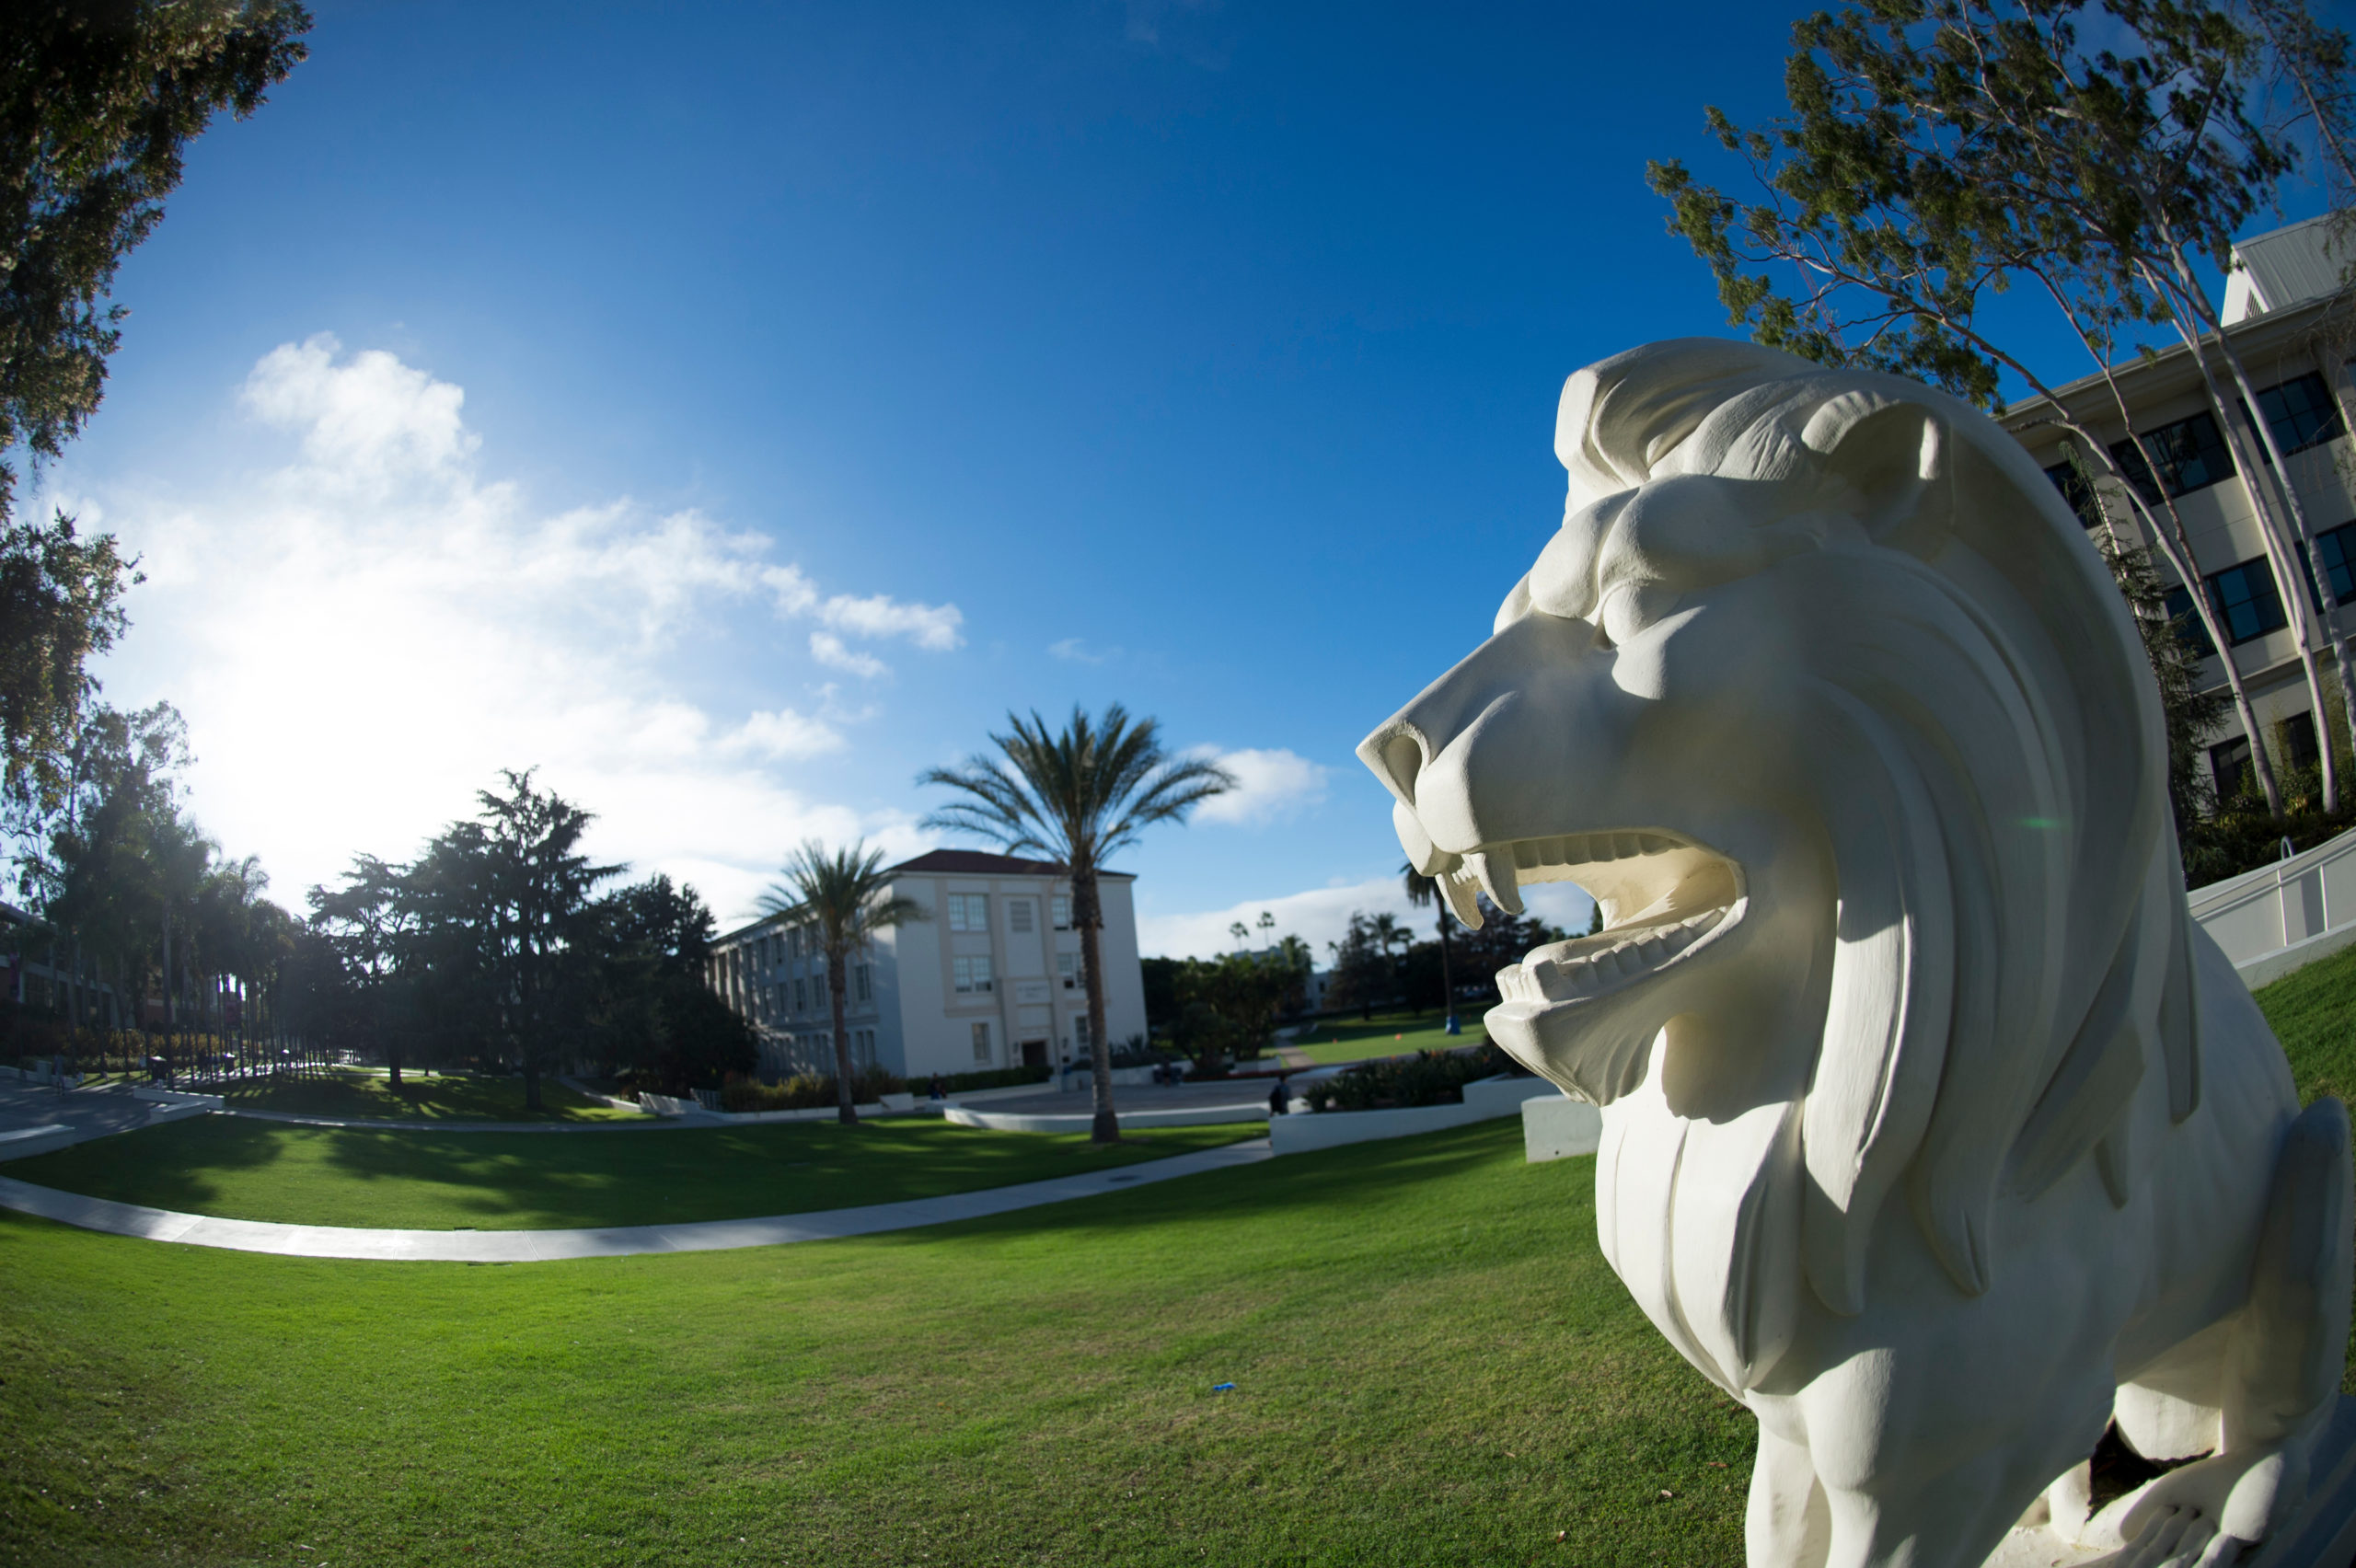 Lion Statue scaled - FAQS about LMU’s Good Samaritan Policy